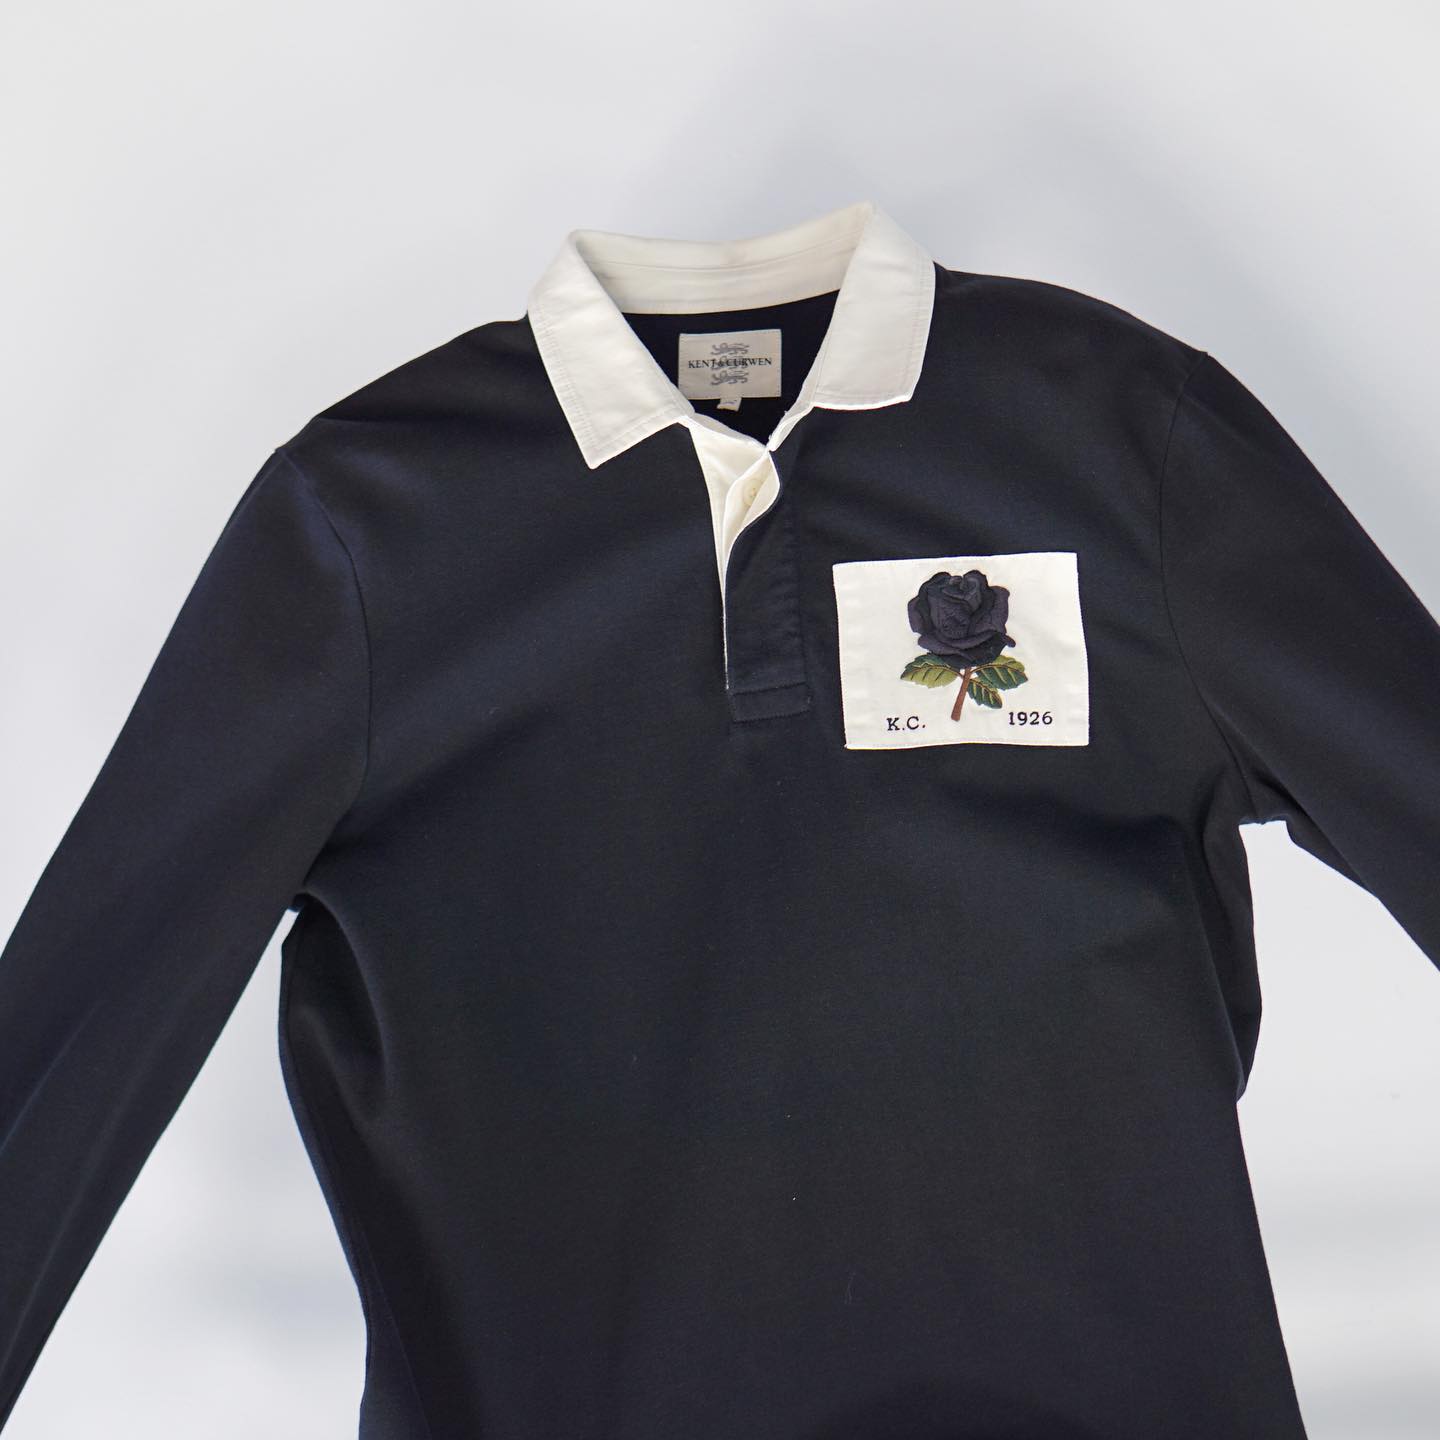 Getting ready for the rugby season with our signature tonal rose patch rugby shirts. Available in black and white.